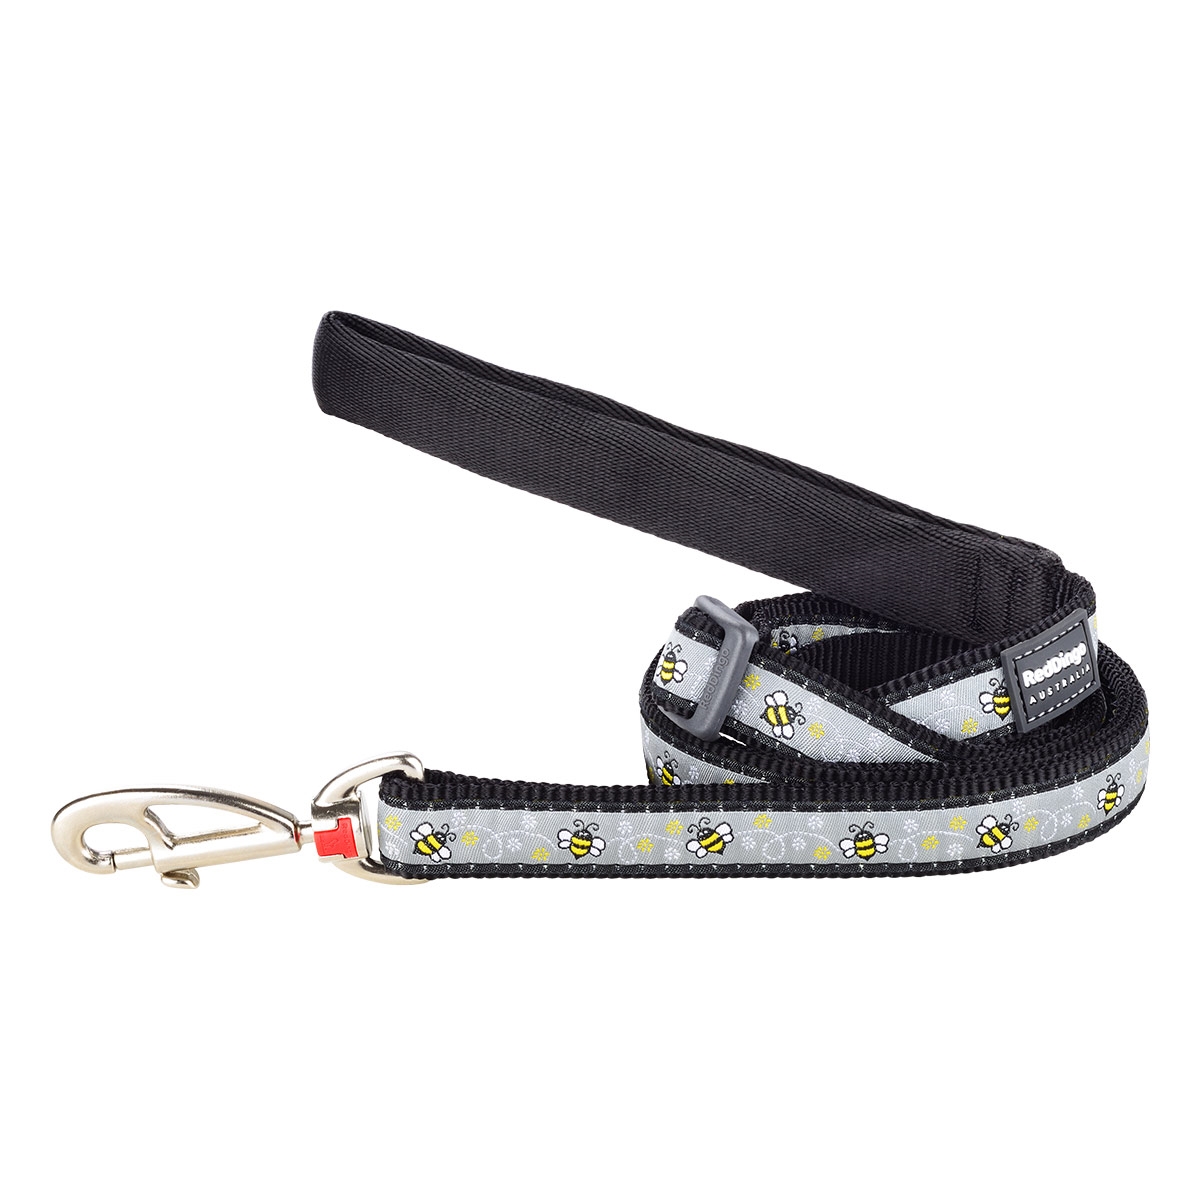 Picture of Red Dingo L6-BM-BB-25 Dog Lead Design Bumble Bee Black - Large 6ft